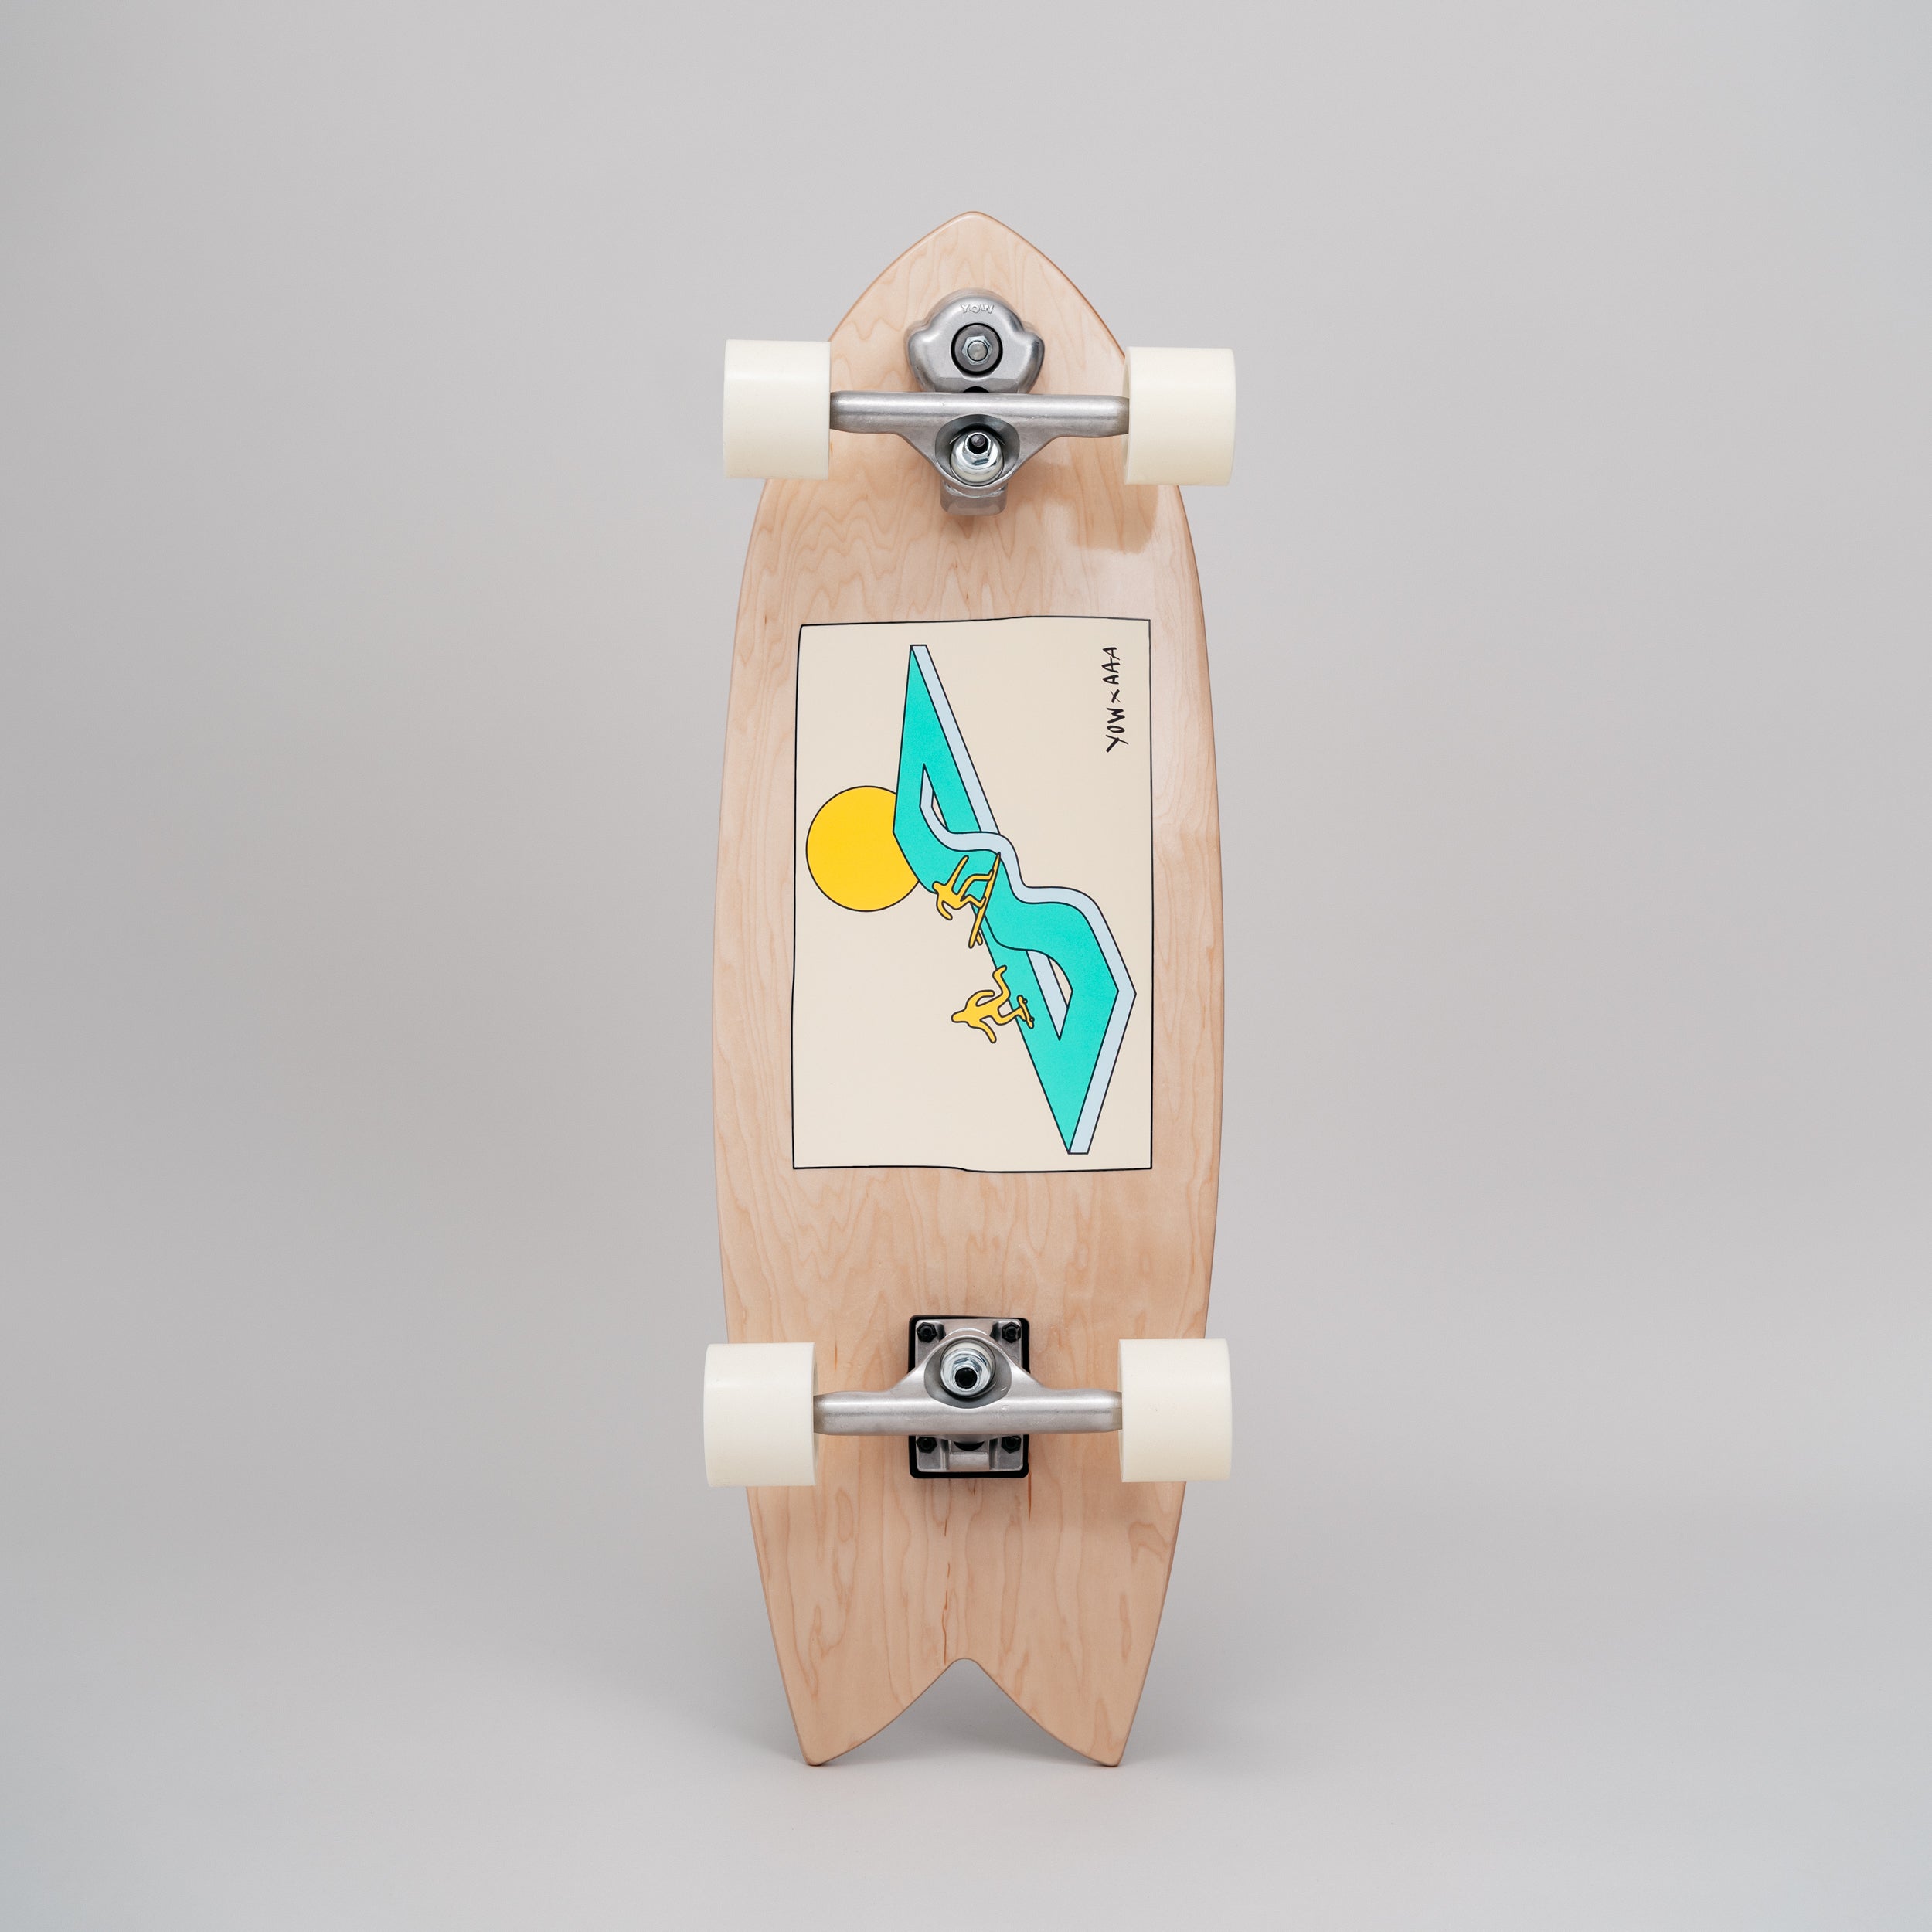 AAA x YOW SURFSKATE LAME 31"